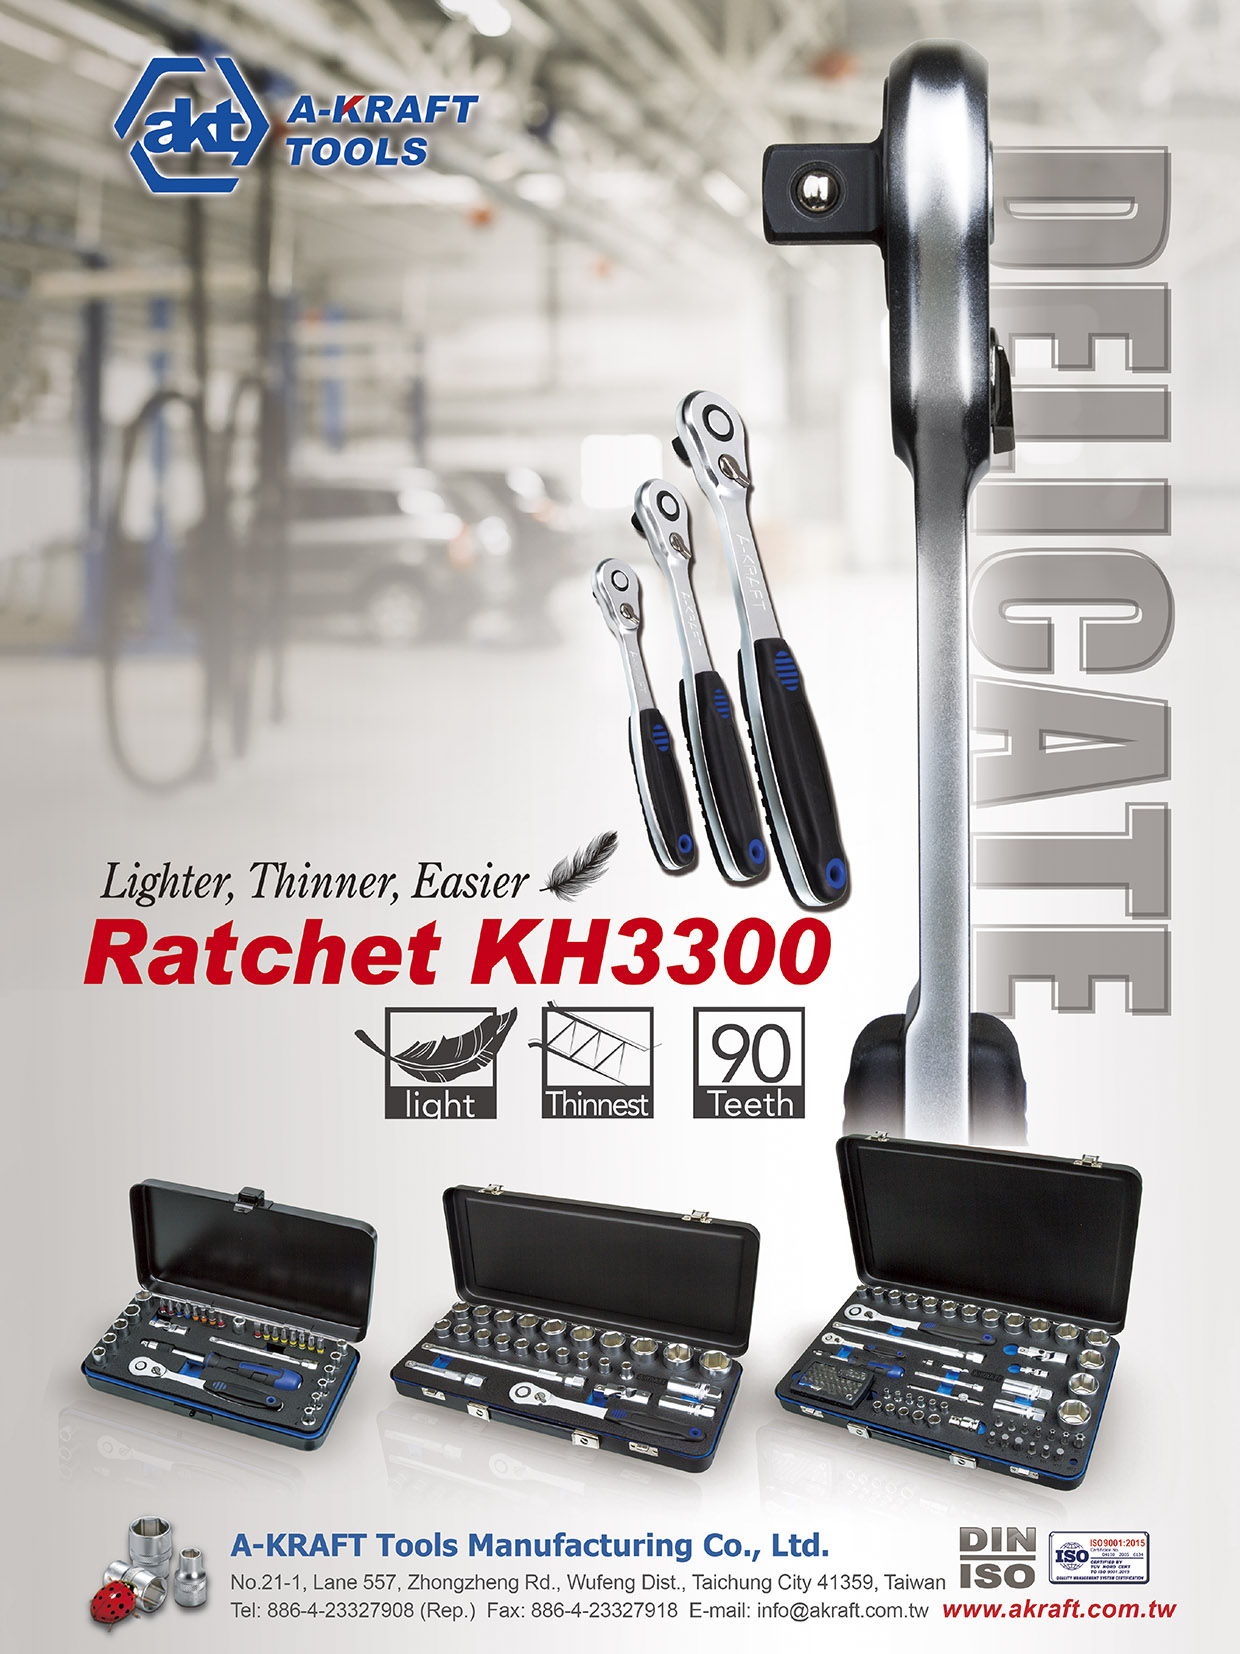 A-KRAFT TOOLS MANUFACTURING CO., LTD. , Delicate Ratchet KH3300 (Sockets, Accessories, Ratchets, Socket Sets, Impact, Wrenches, Screwdrivers Pliers, Insulated Pliers & Screwdrivers, Tool Cabinets, Sockets & Tools Storages, Giveaways)